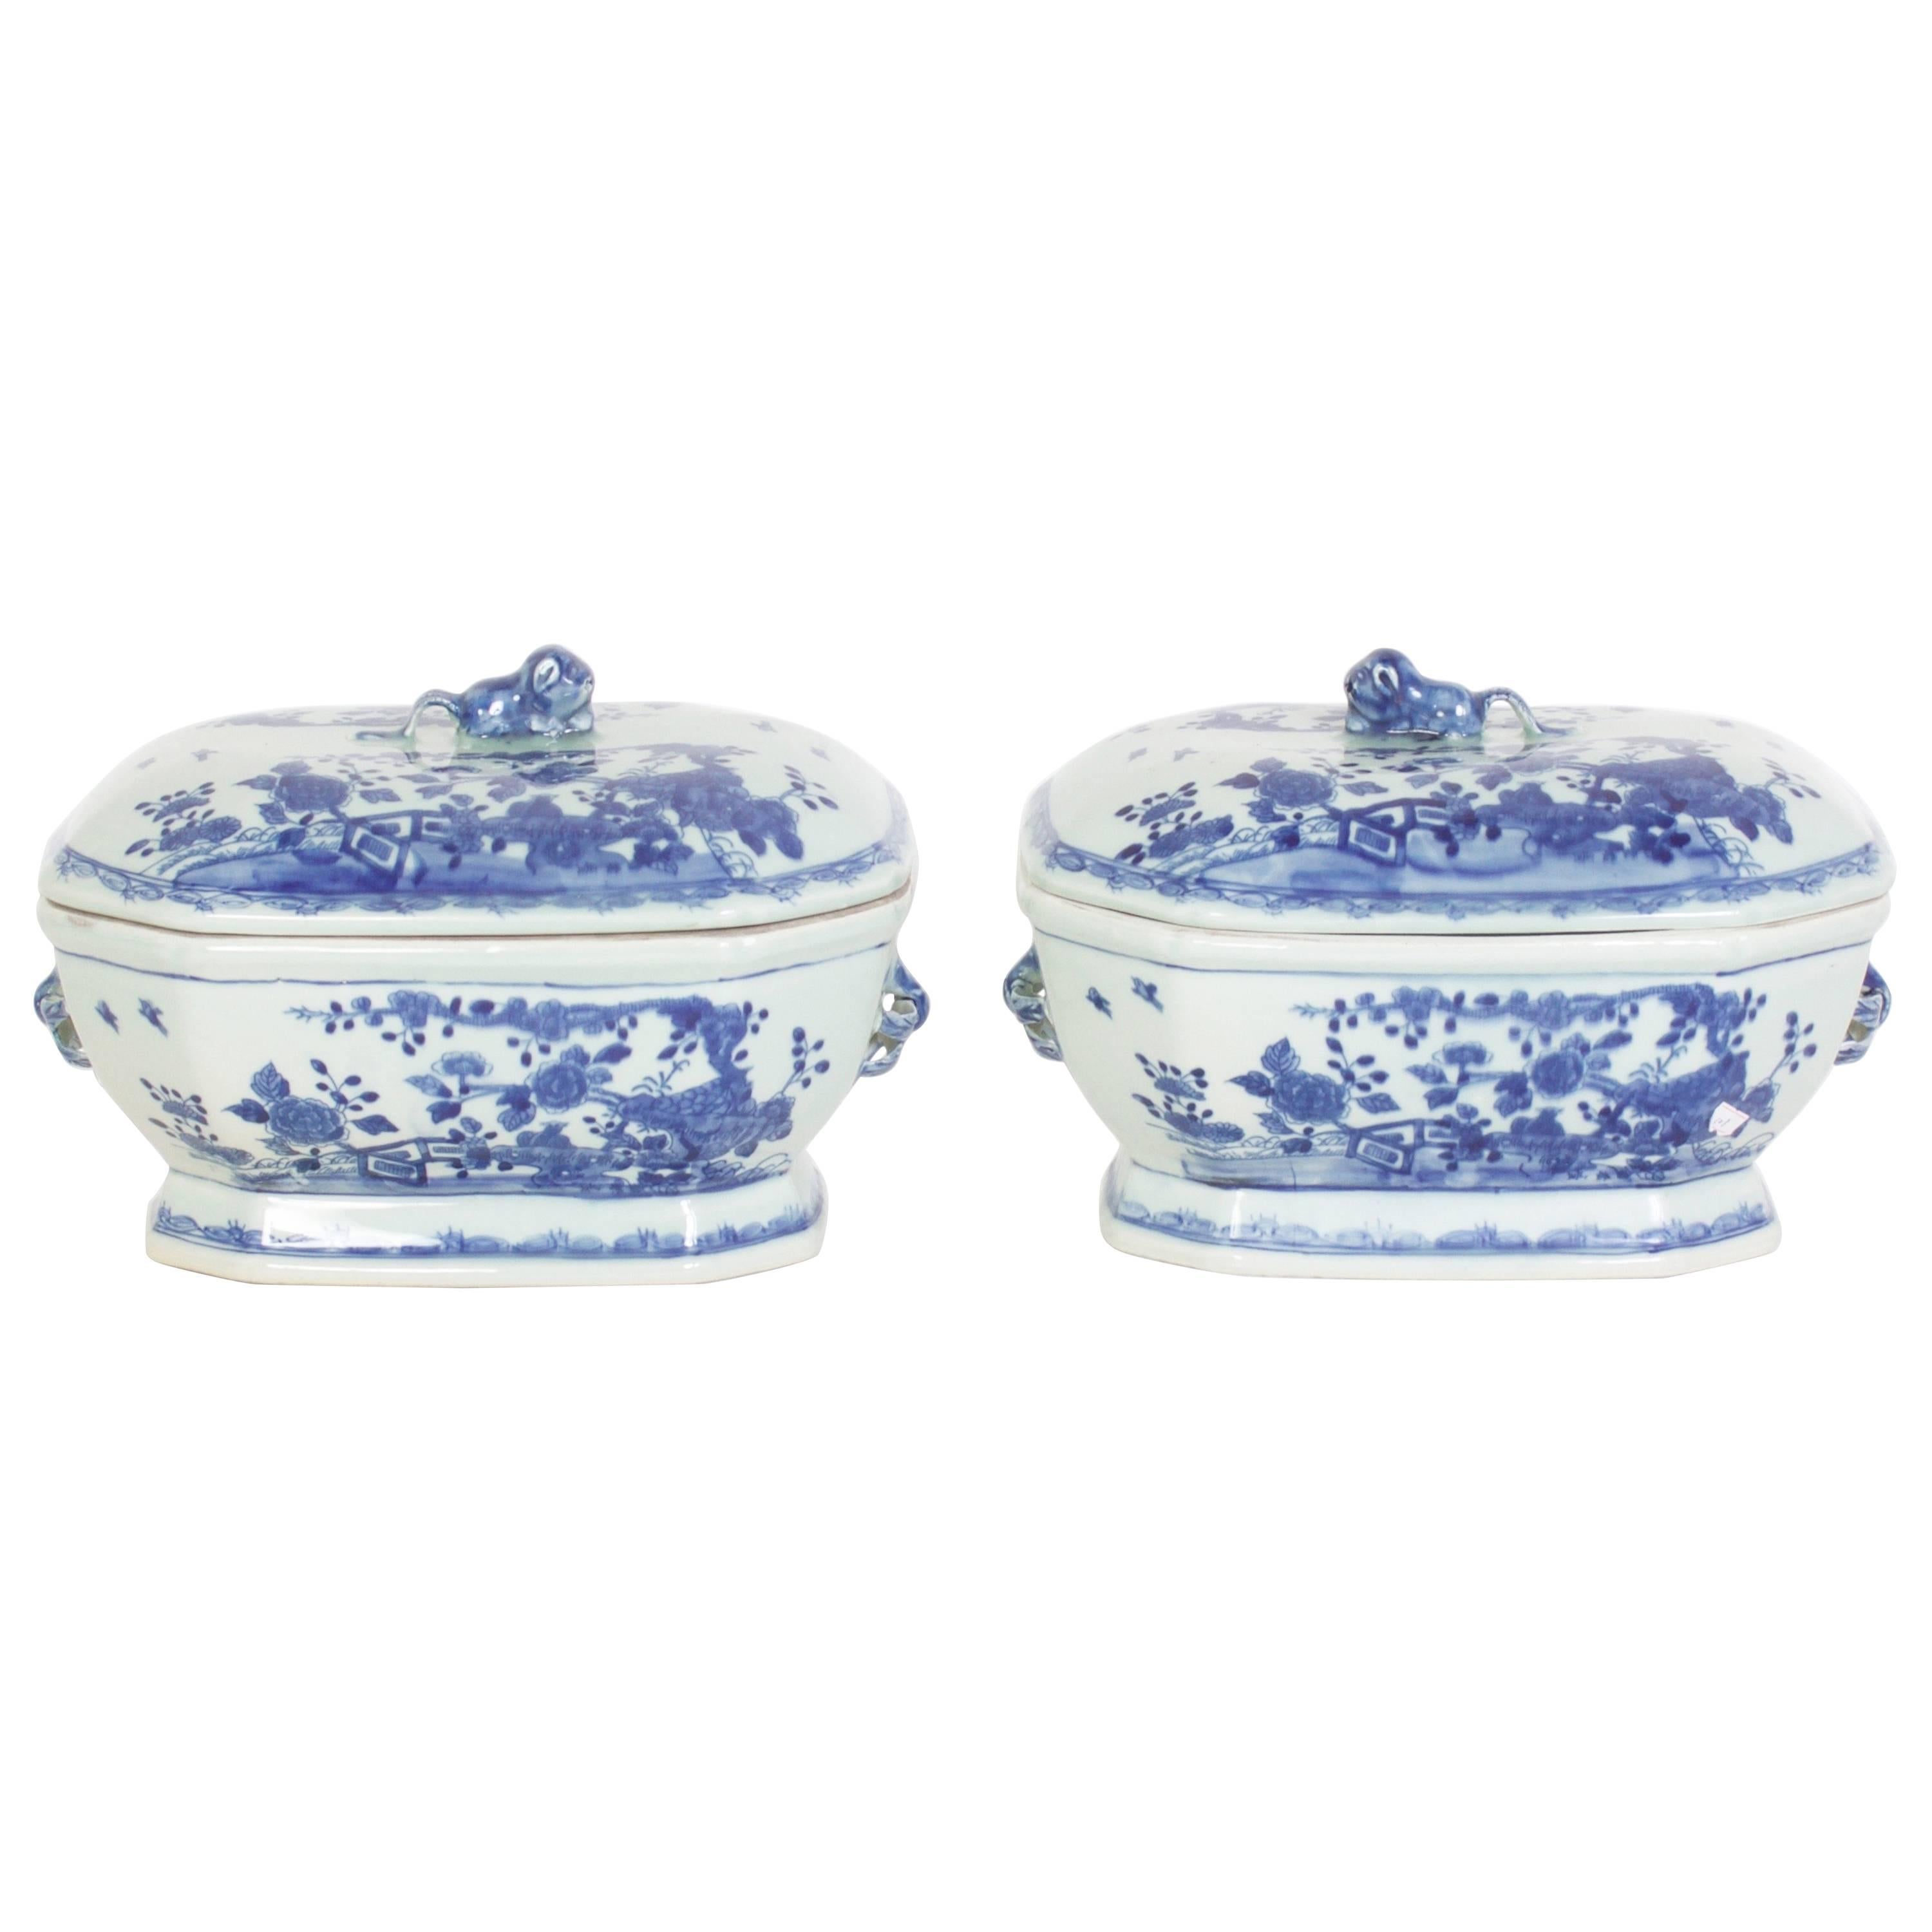 Chinese Export Style Blue and White Porcelain Lidded Tureens